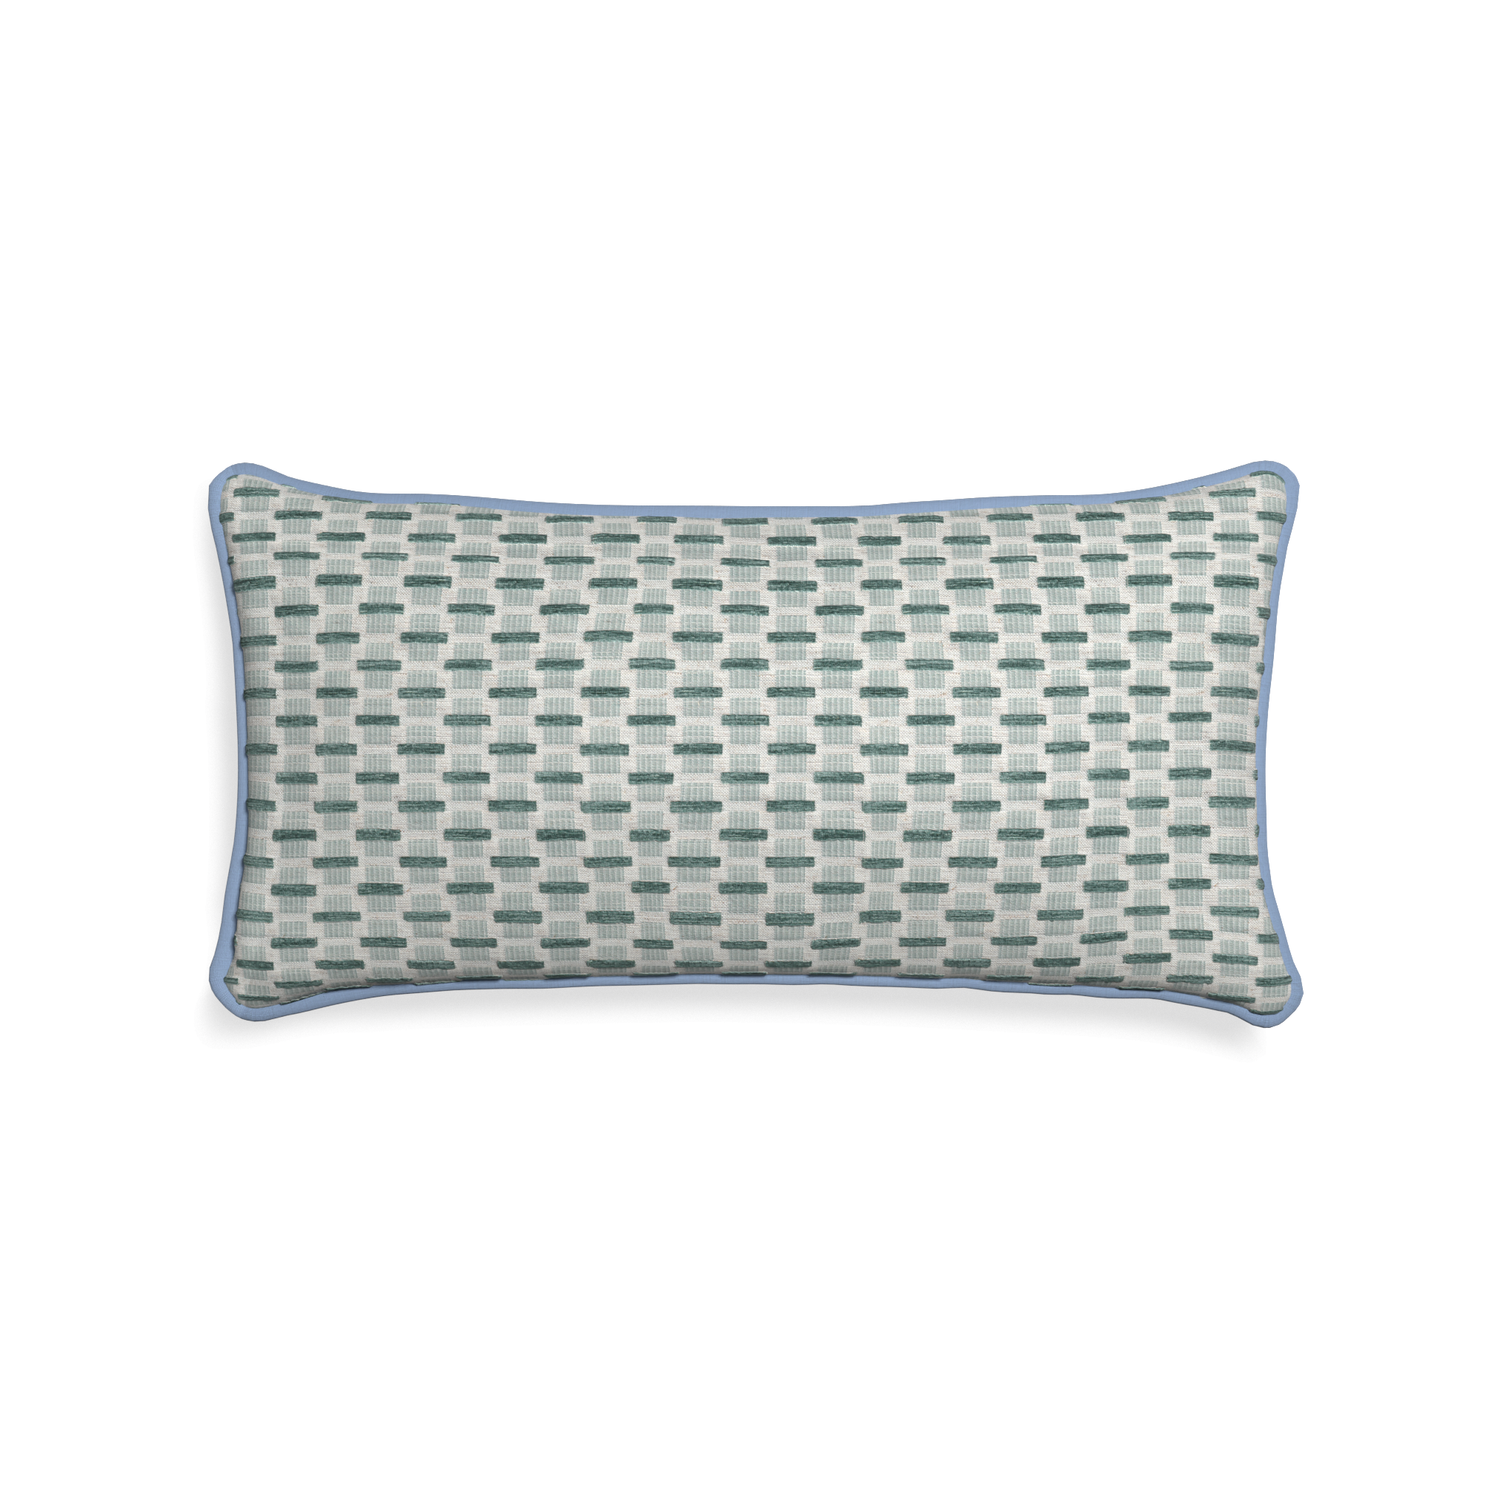 Midi-lumbar willow mint custom green geometric chenillepillow with sky piping on white background